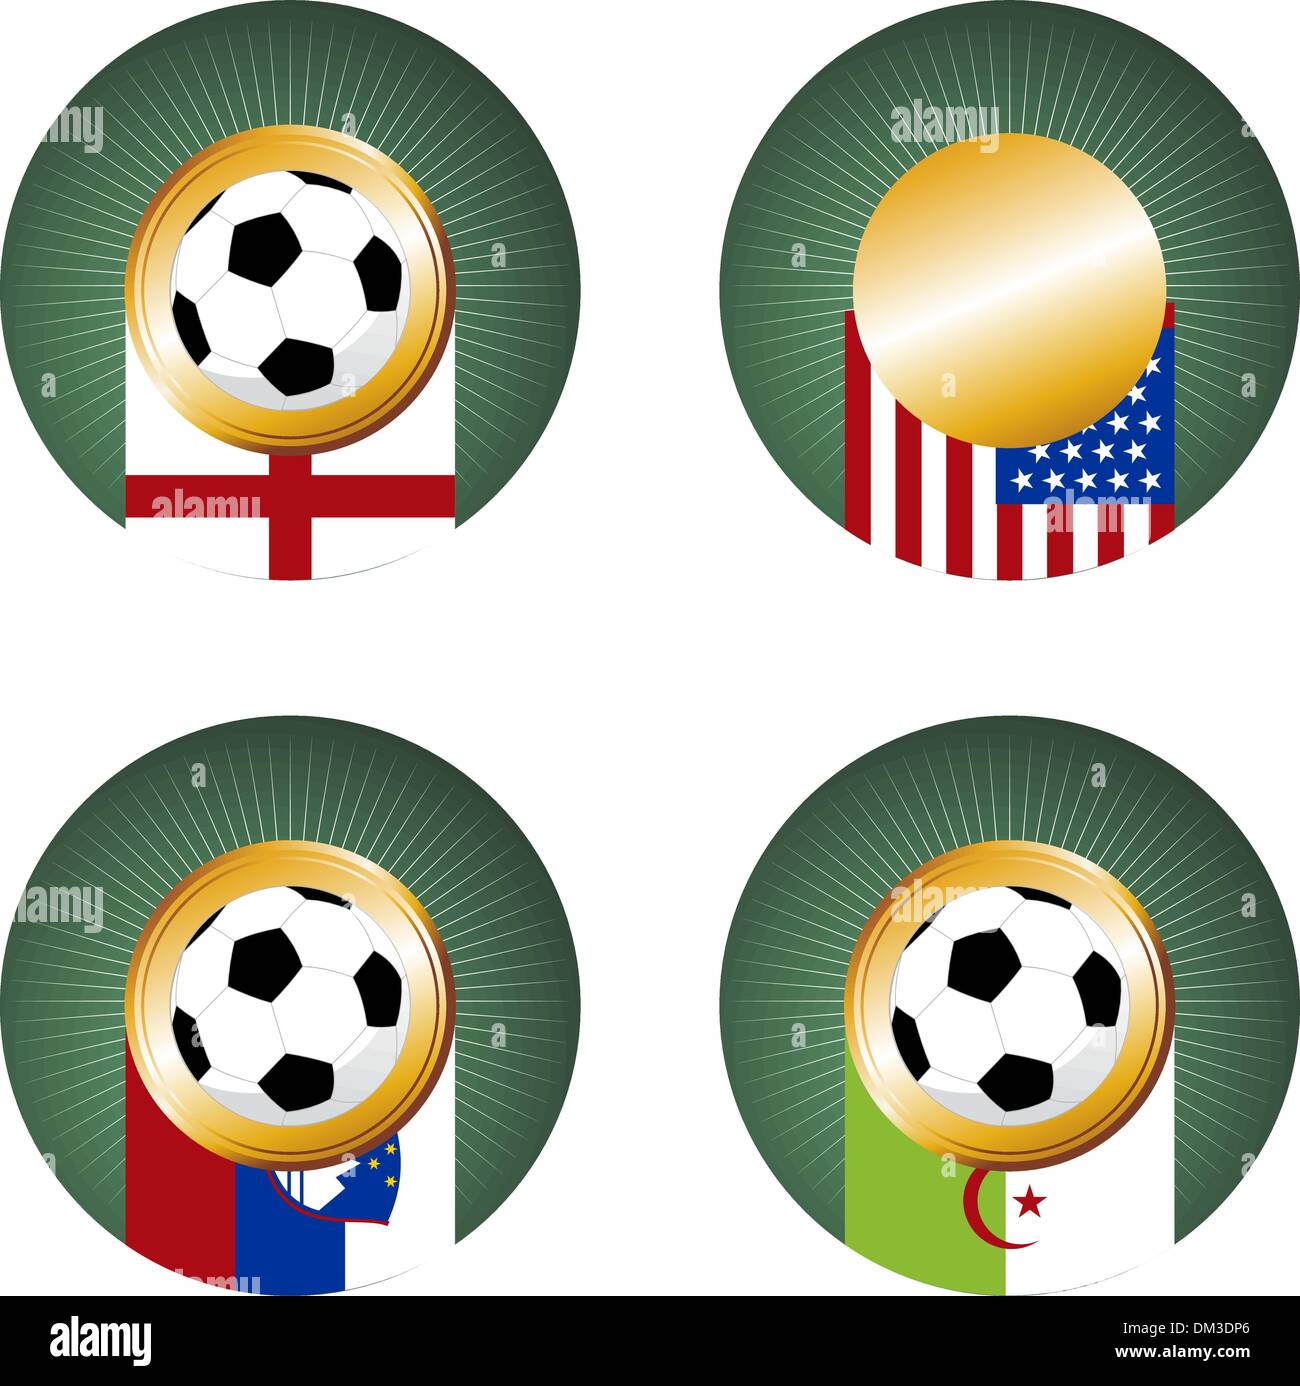 2010 World Cup South Africa  Group C Stock Vector